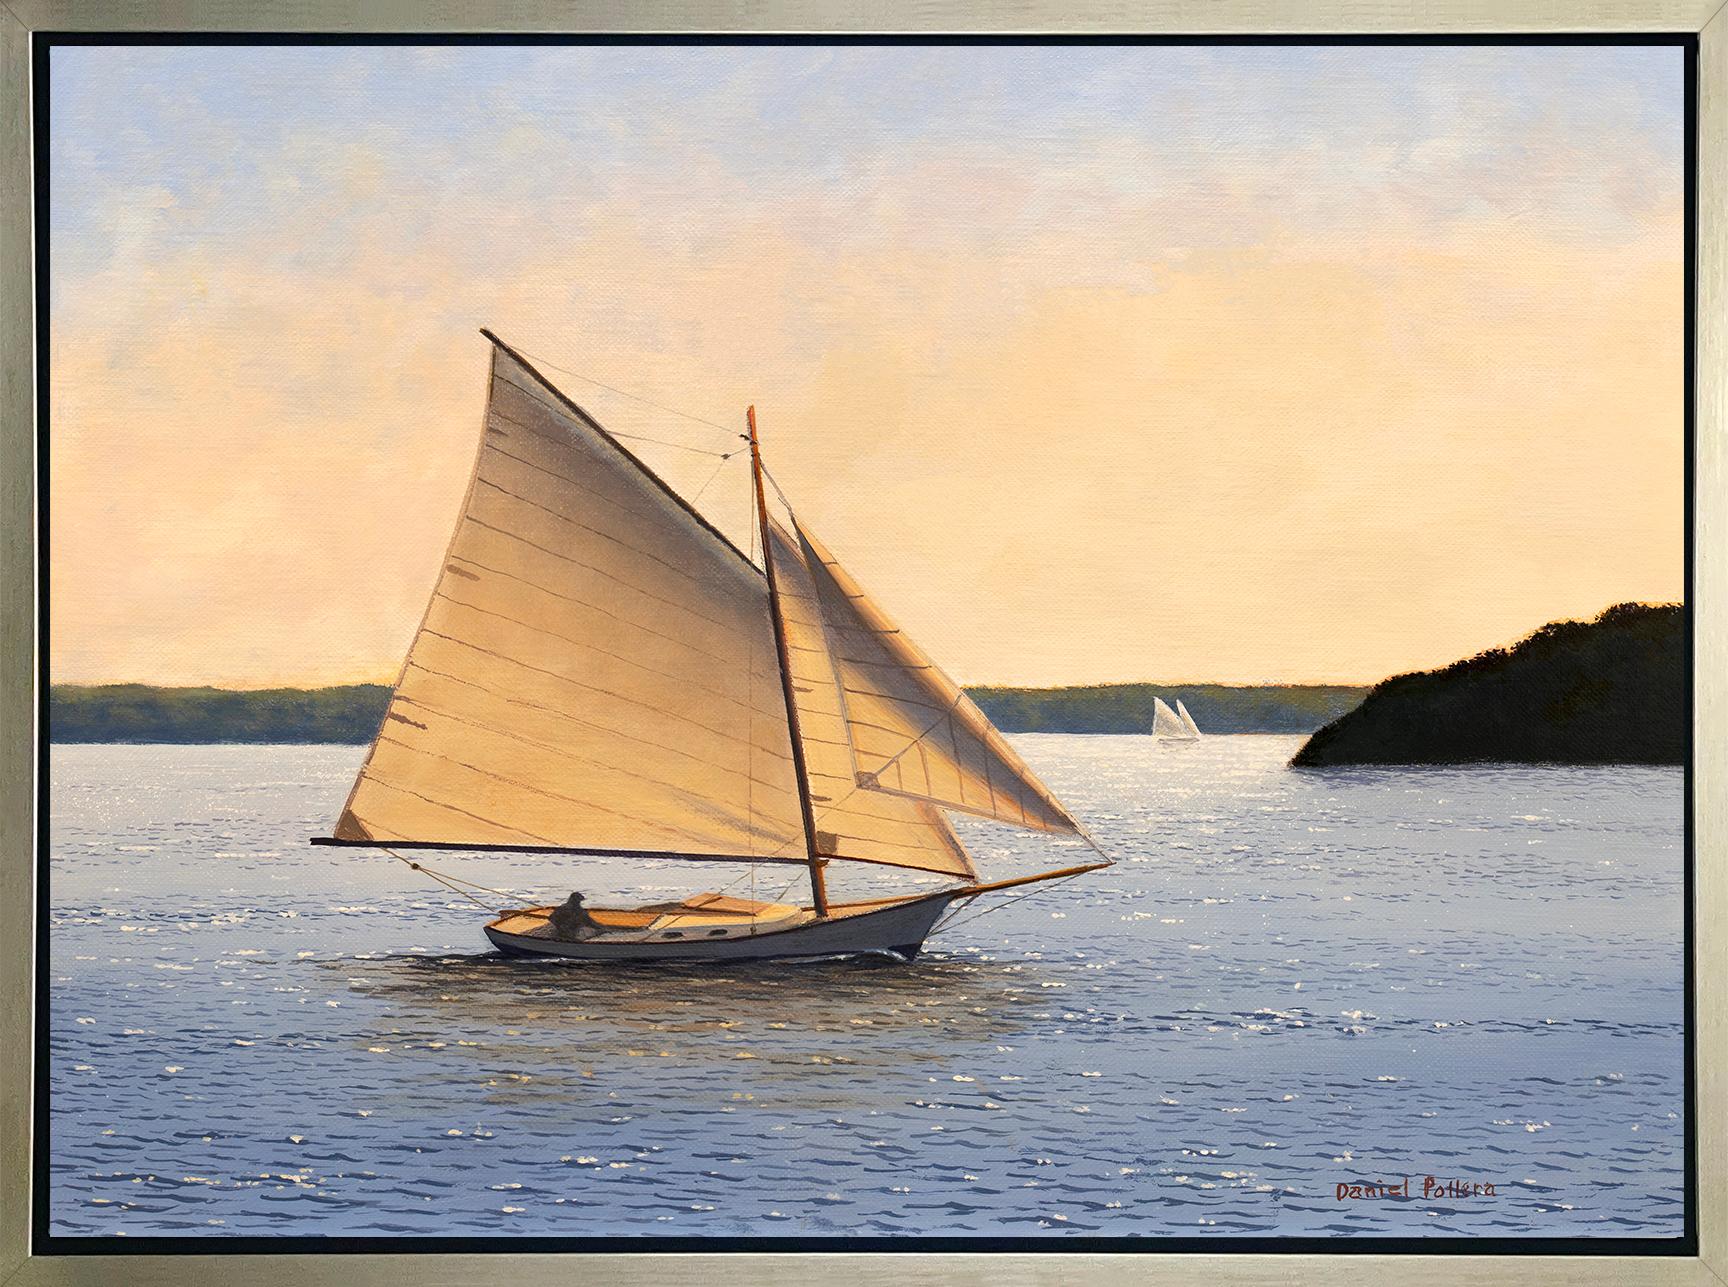 Daniel Pollera Landscape Print - "Sailing Out to Sea, " Framed Limited Edition Giclee Print, 24" x 32"